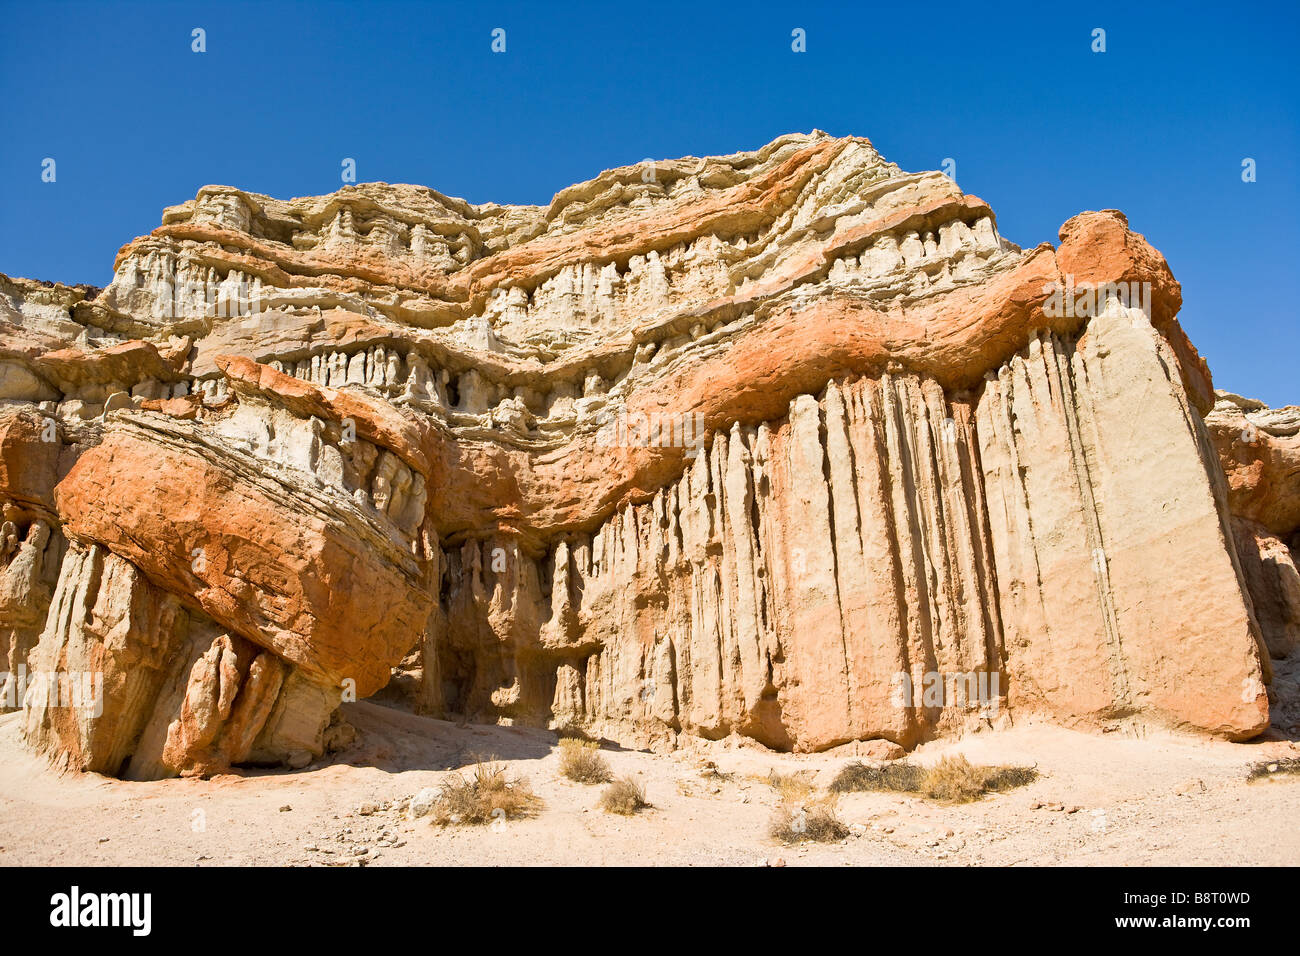 sedimentary rock formation Red Rock Canyon State Park California Untied States of America Stock Photo